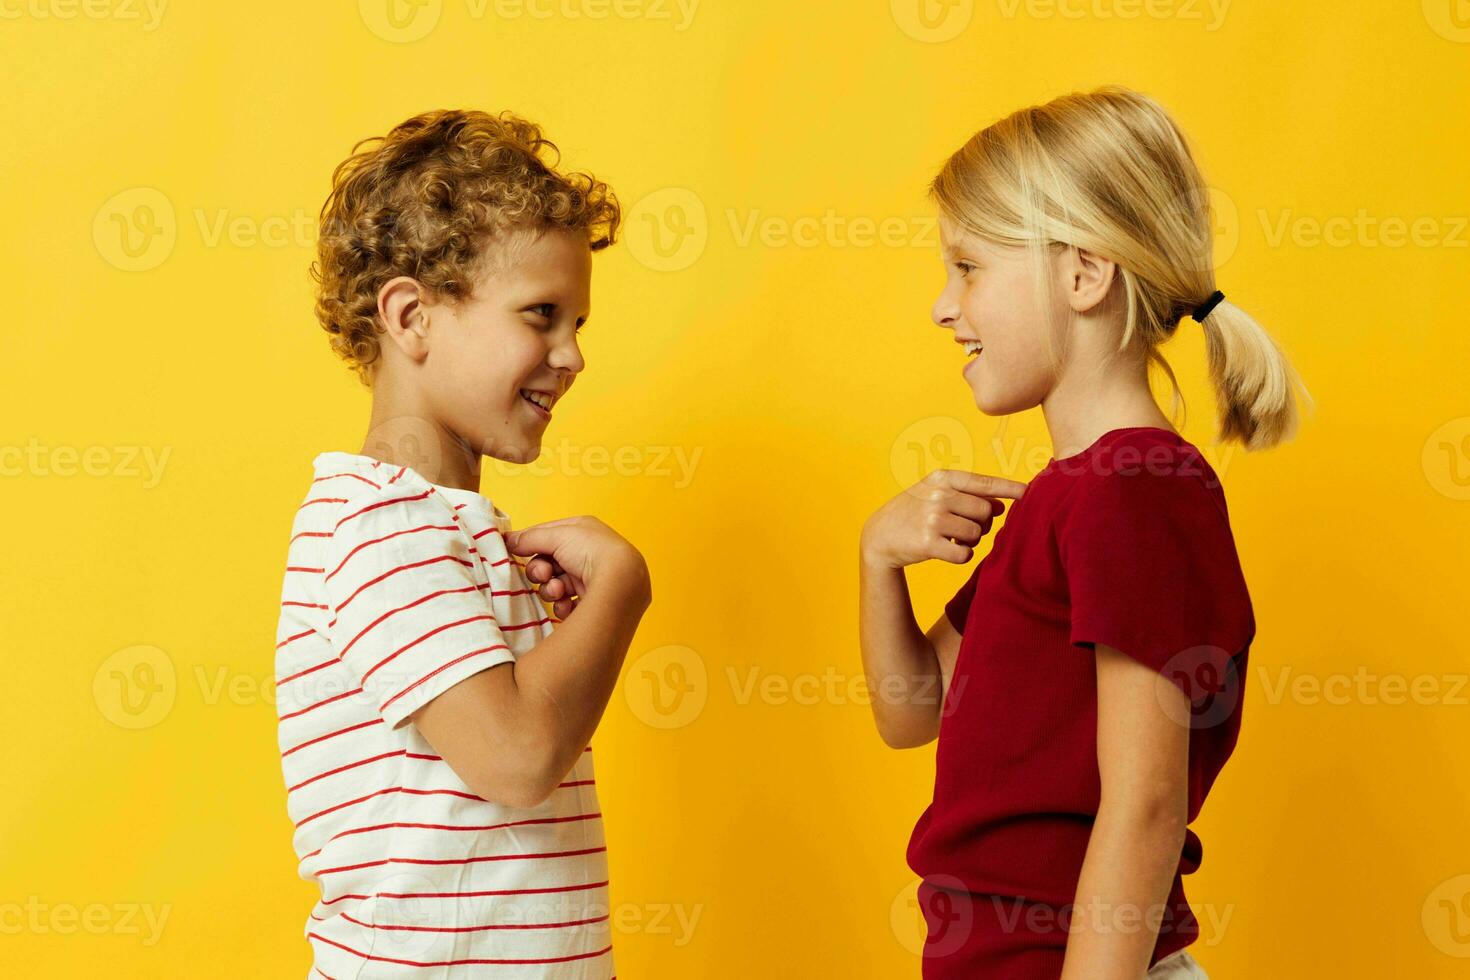 Boy and girl standing side by side posing childhood emotions on colored background photo